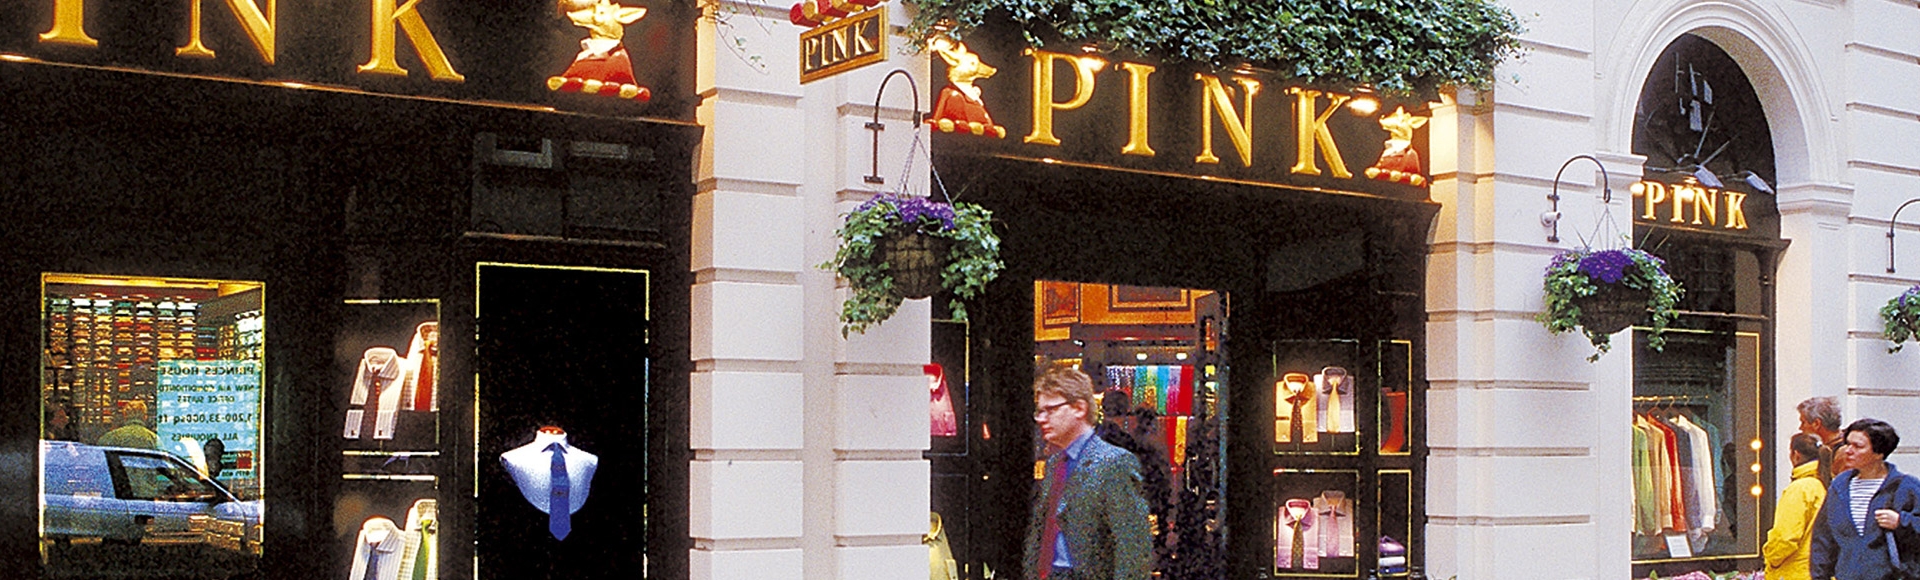 As Thomas Pink shuts shop, what traditional shirtmakers are doing